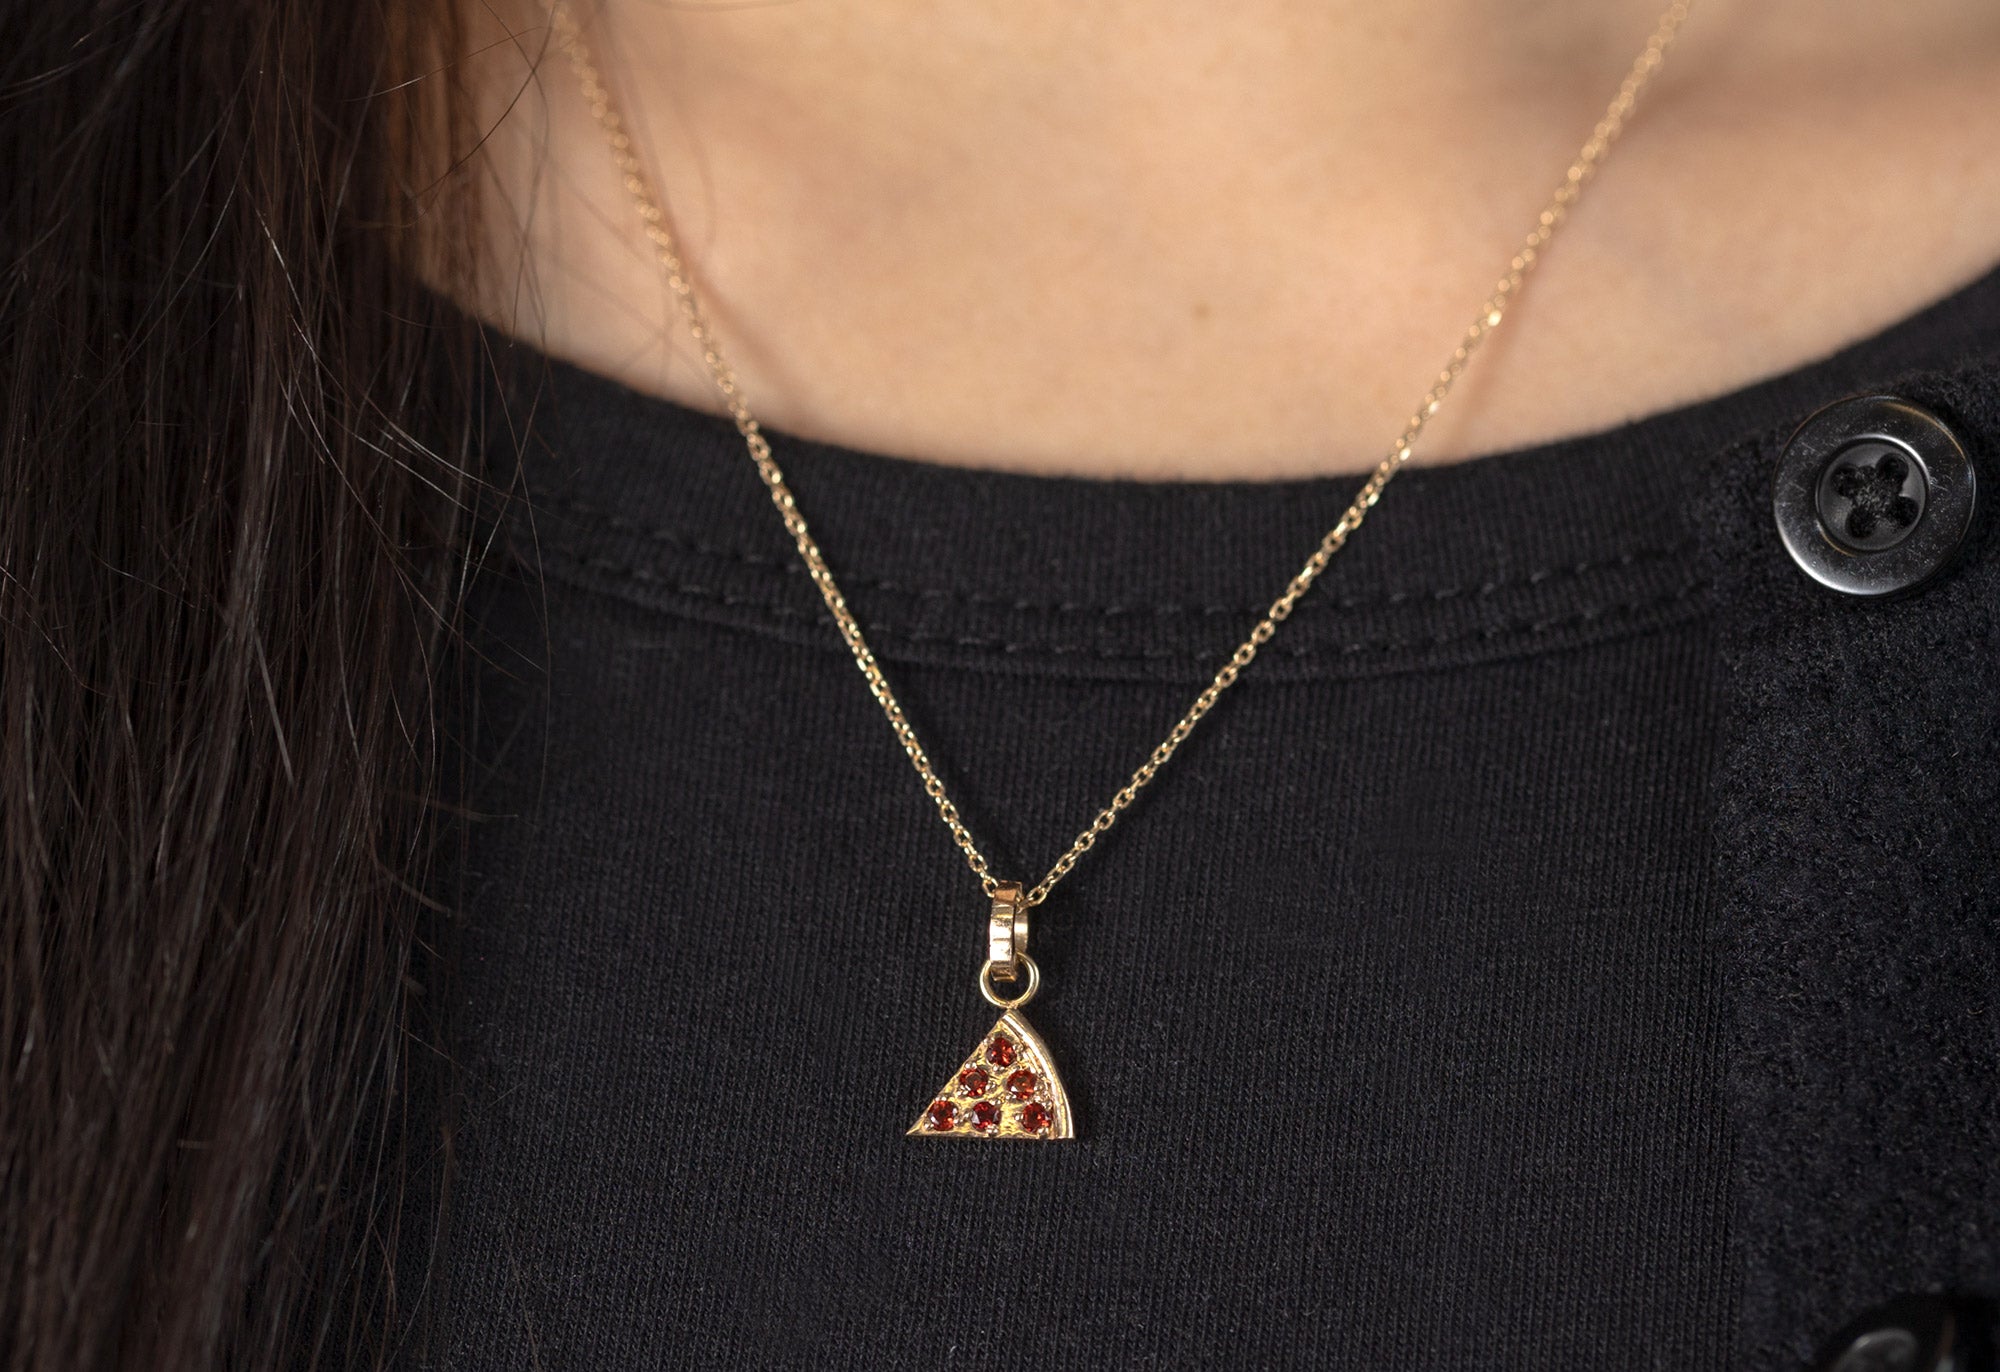 10k Yellow Gold Pizza Slice Charm on Chain Necklace on Model